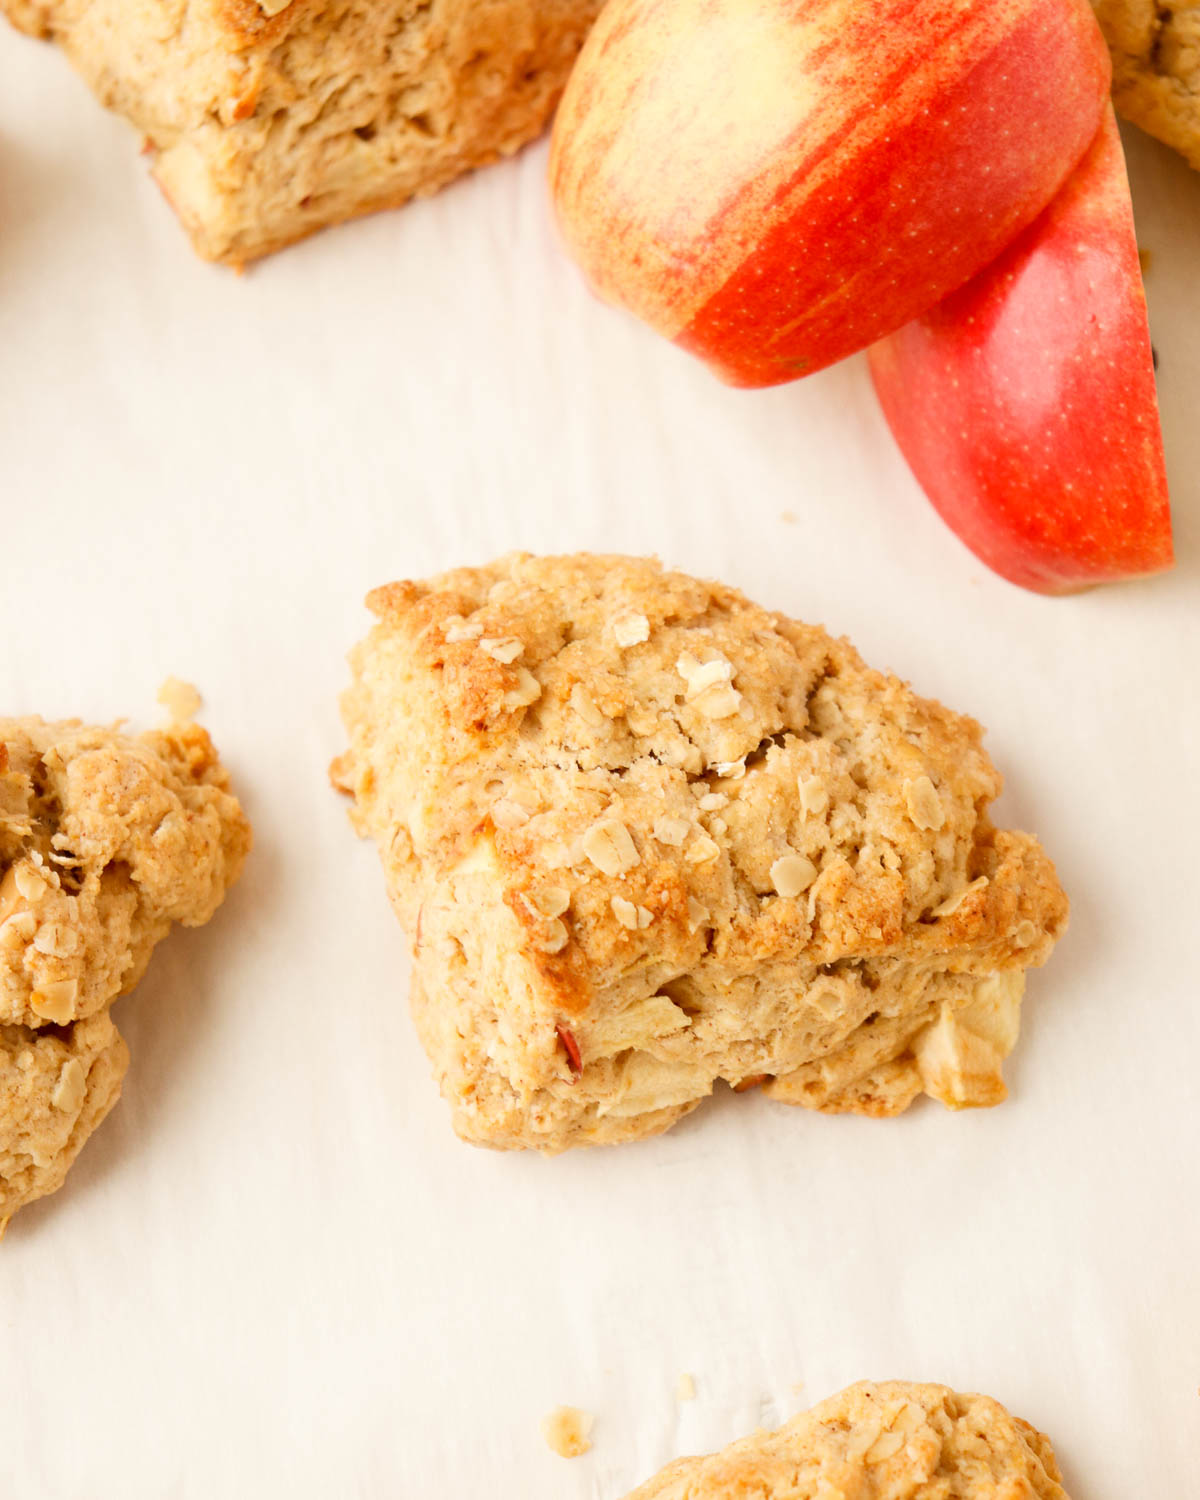 Apple oat scone with sliced red apples.